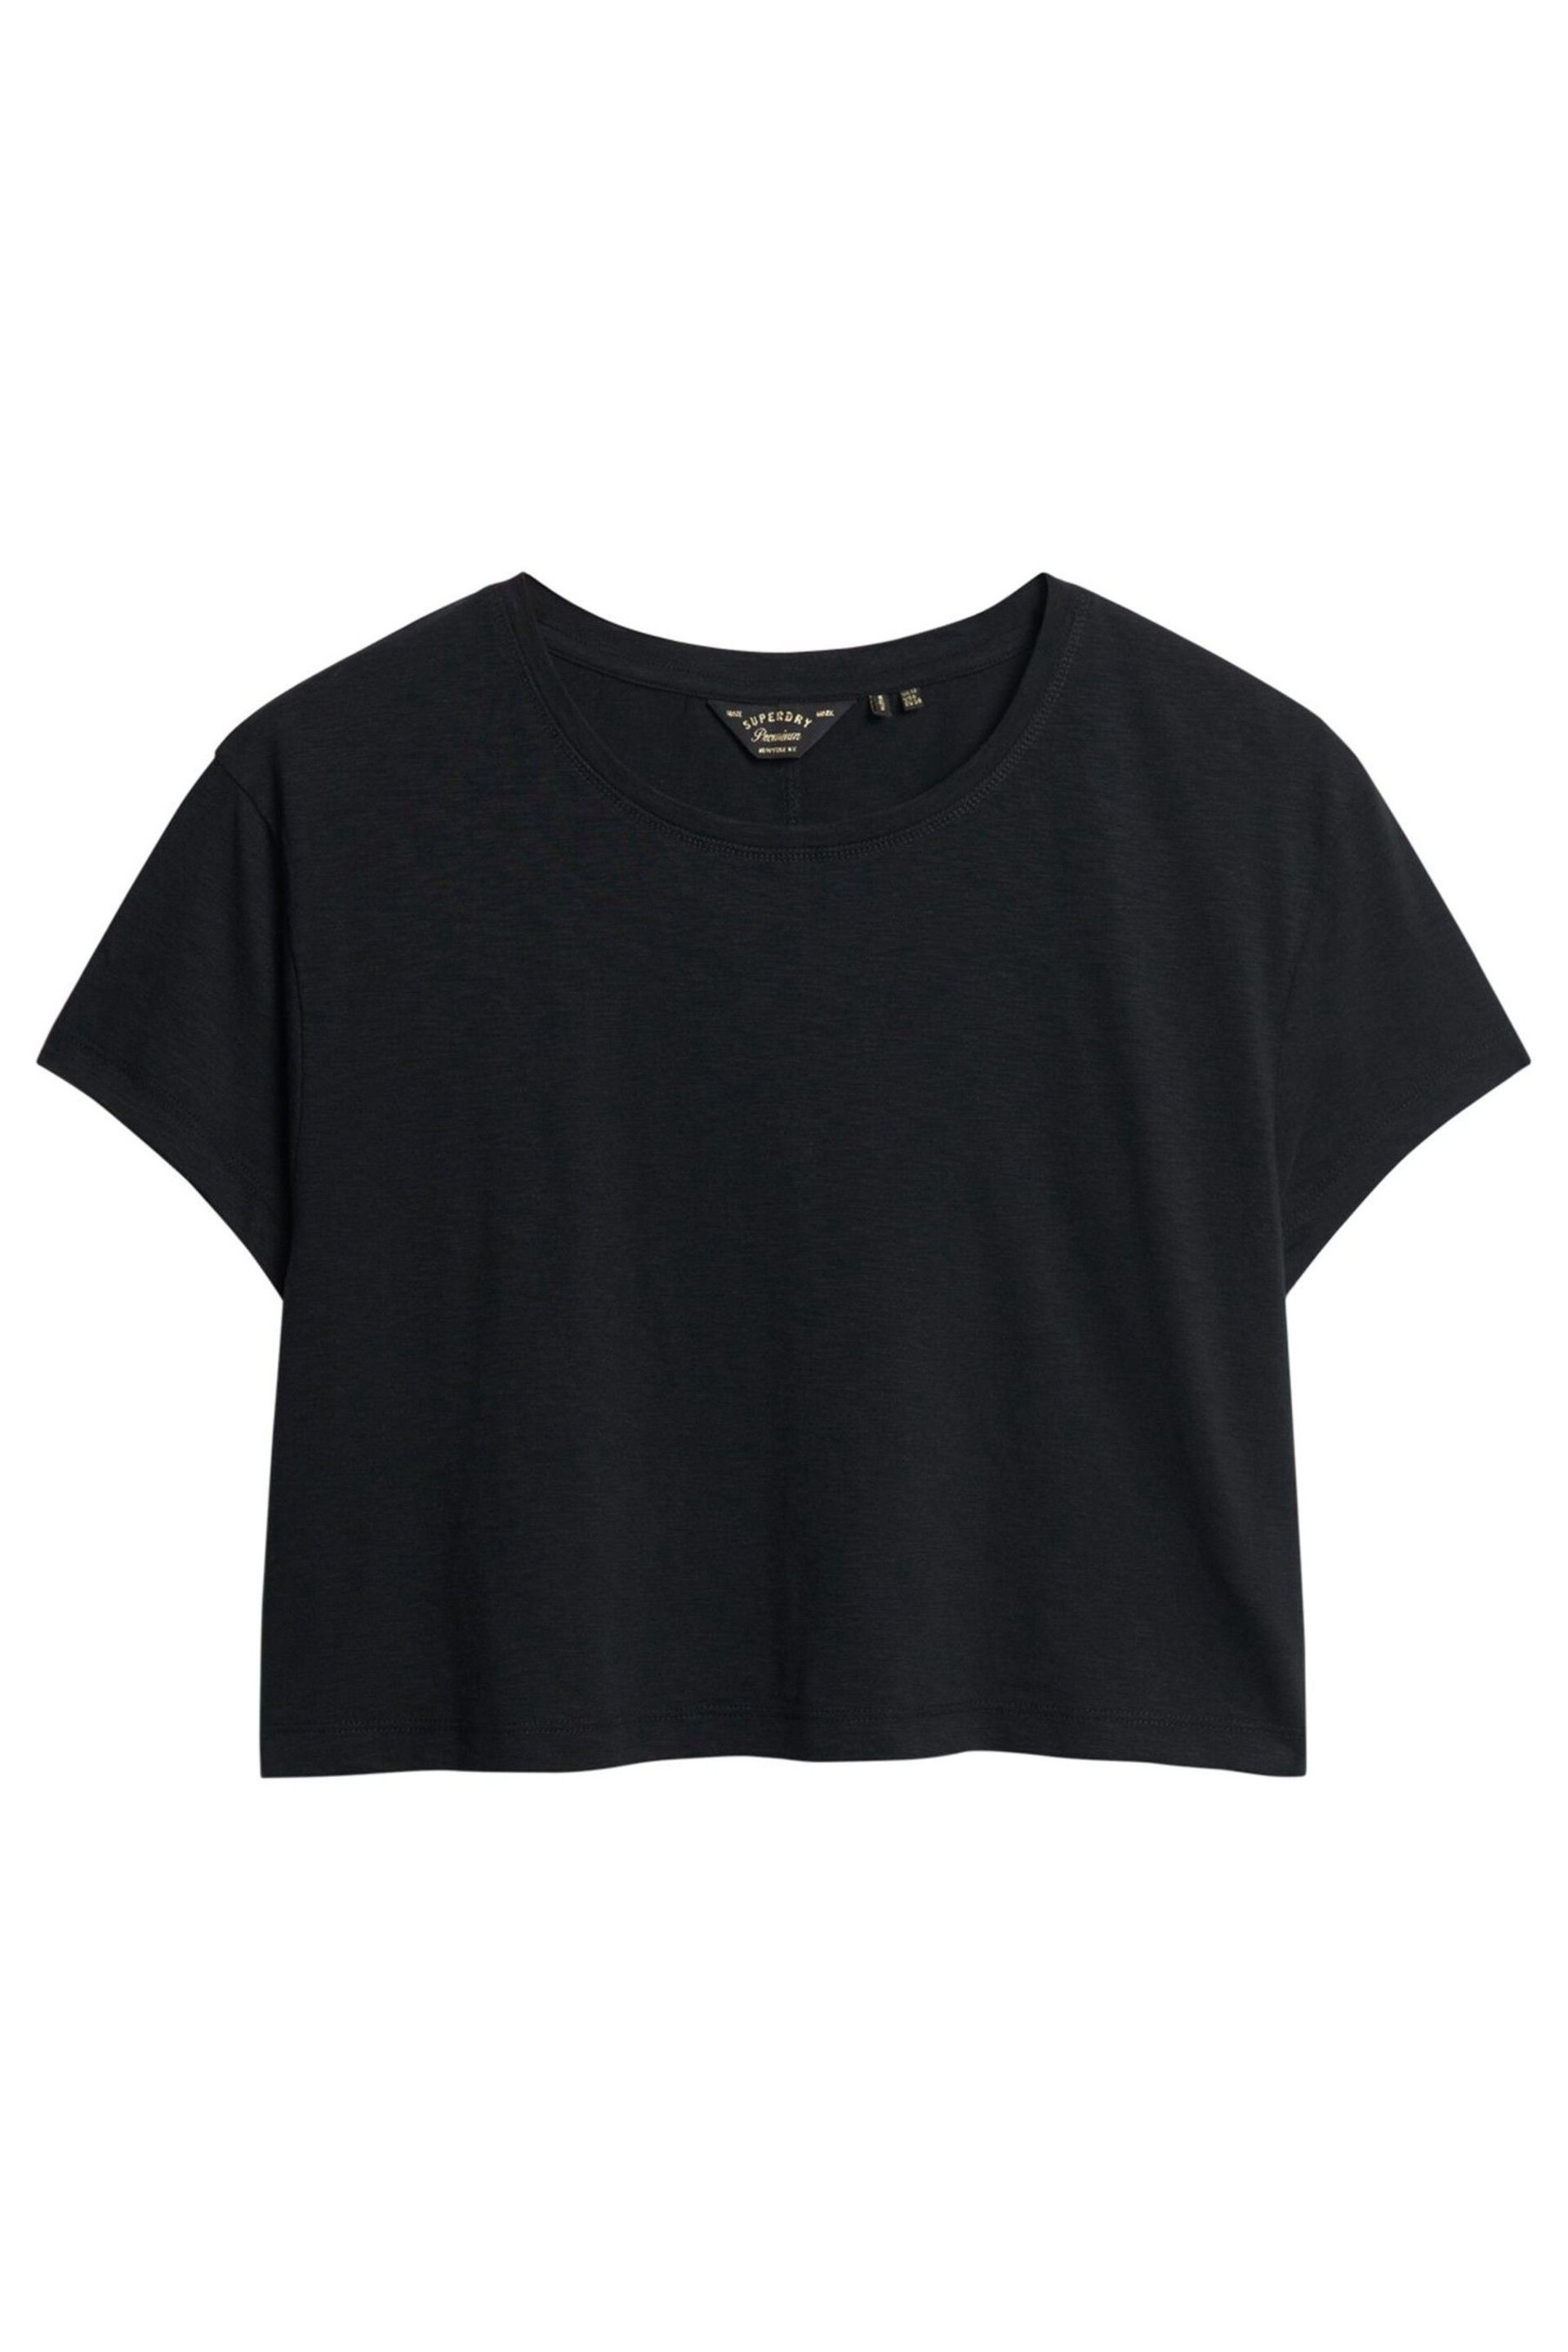 Superdry Black Slouchy Cropped T-Shirt - Image 5 of 6